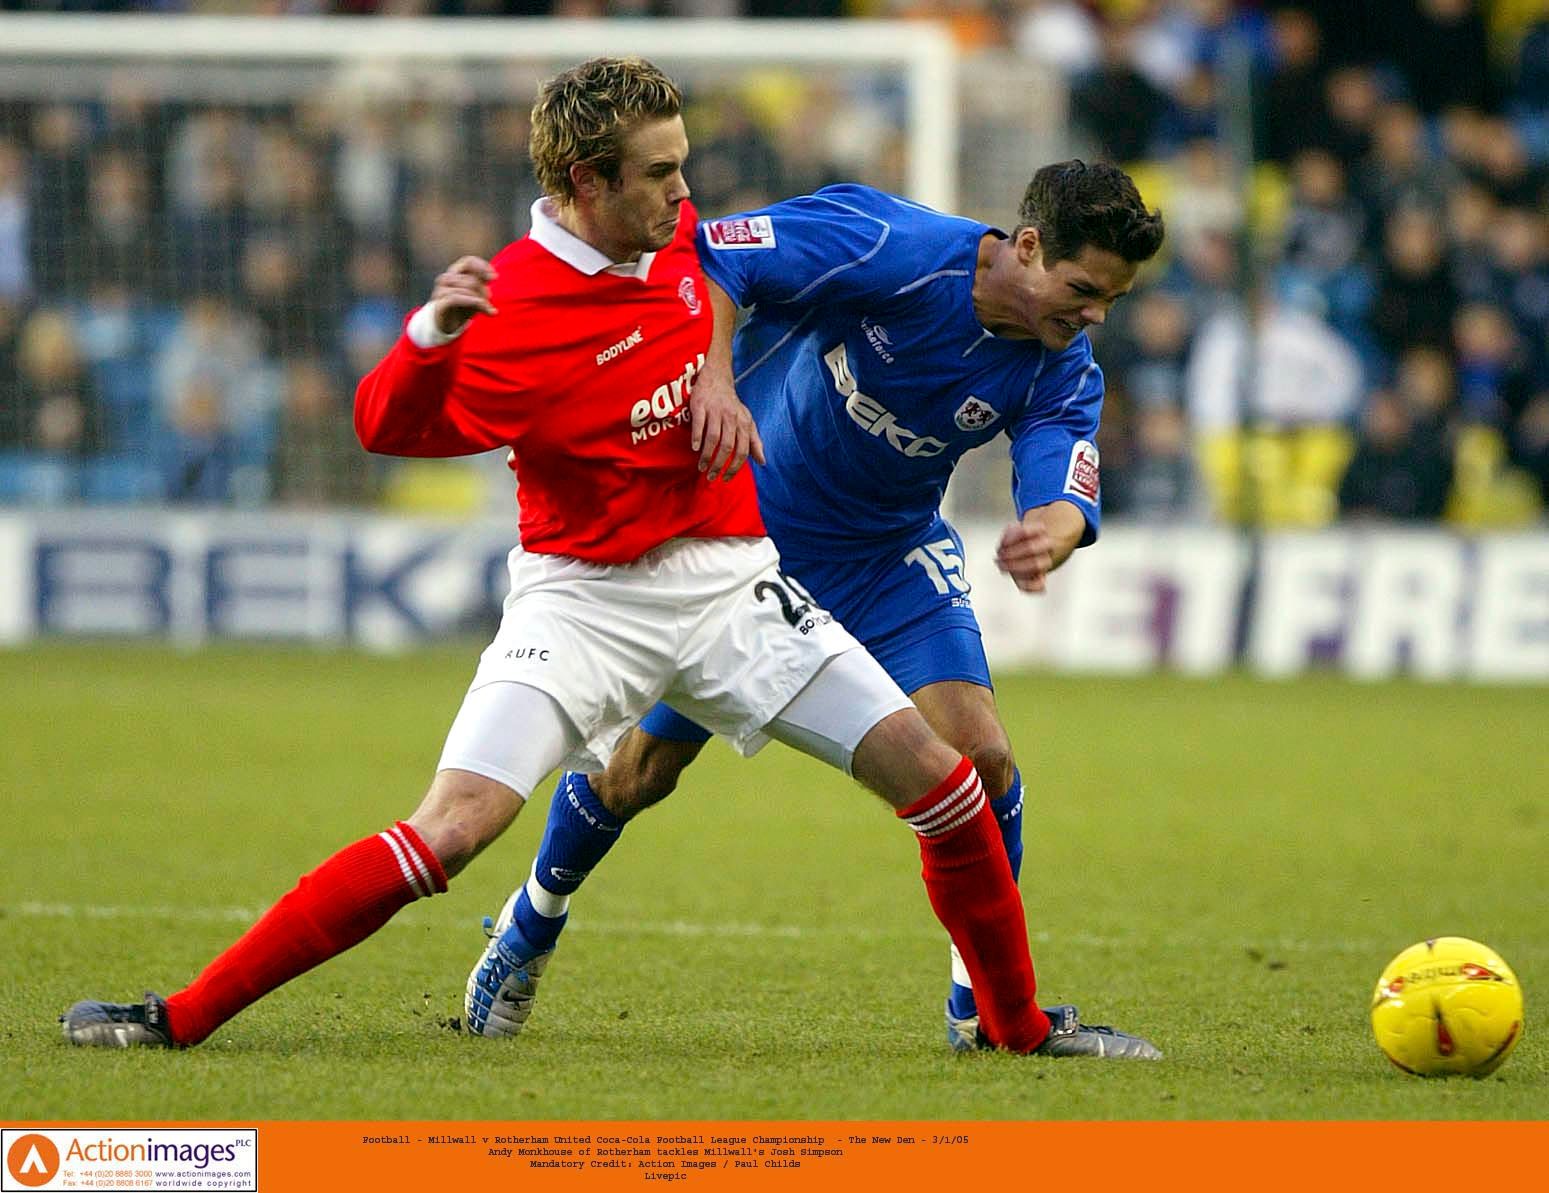 Football - Millwall v Rotherham United Coca-Cola Football League Championship  - The New Den - 3/1/05 
Andy Monkhouse of Rotherham tackles Millwall's Josh Simpson 
Mandatory Credit: Action Images / Paul Childs 
Livepic